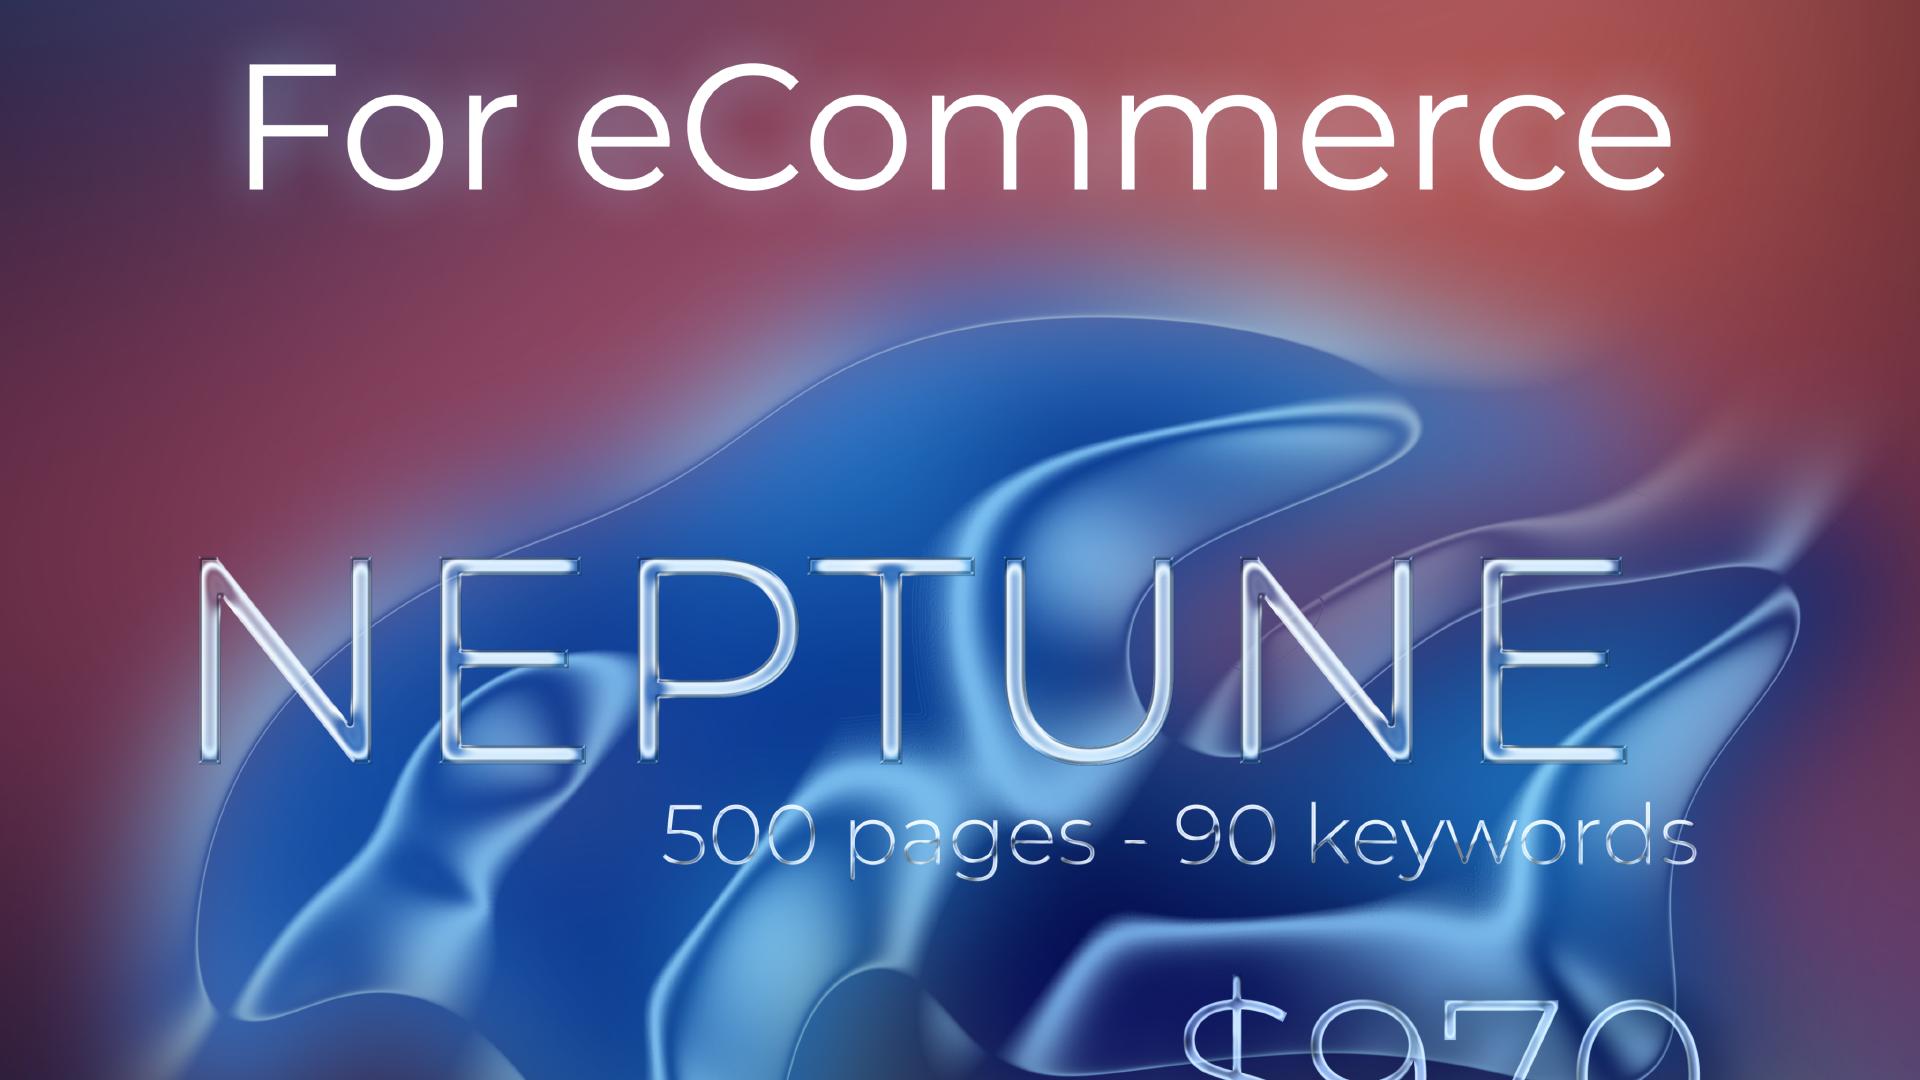 Packages for E-Commerce: SEO package 'Neptune': 500 pages - 90 keywords for $970